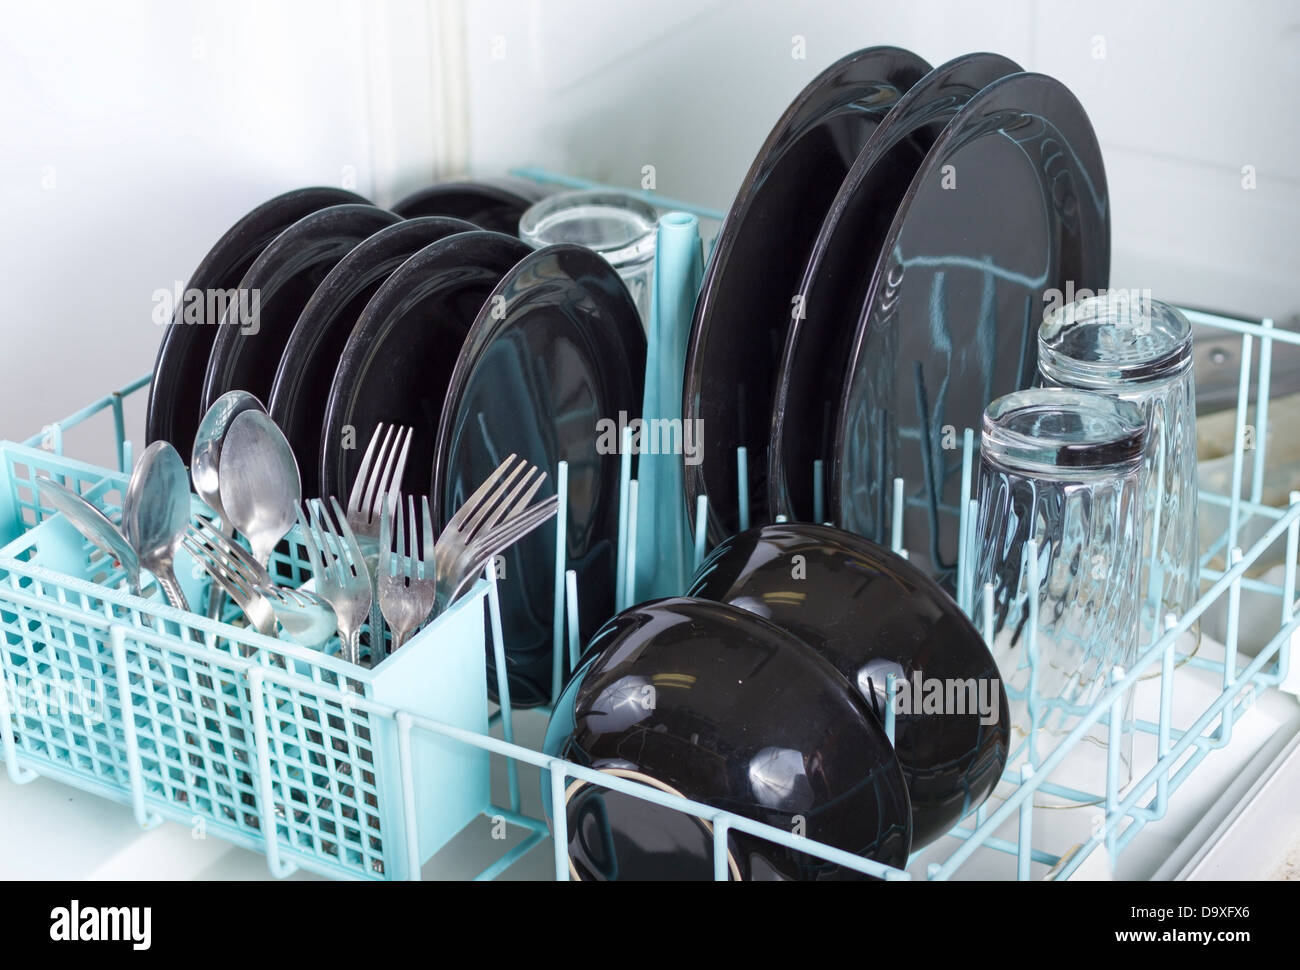 Dishwasher rack loaded with clean plates, glasses and silverware. Stock Photo